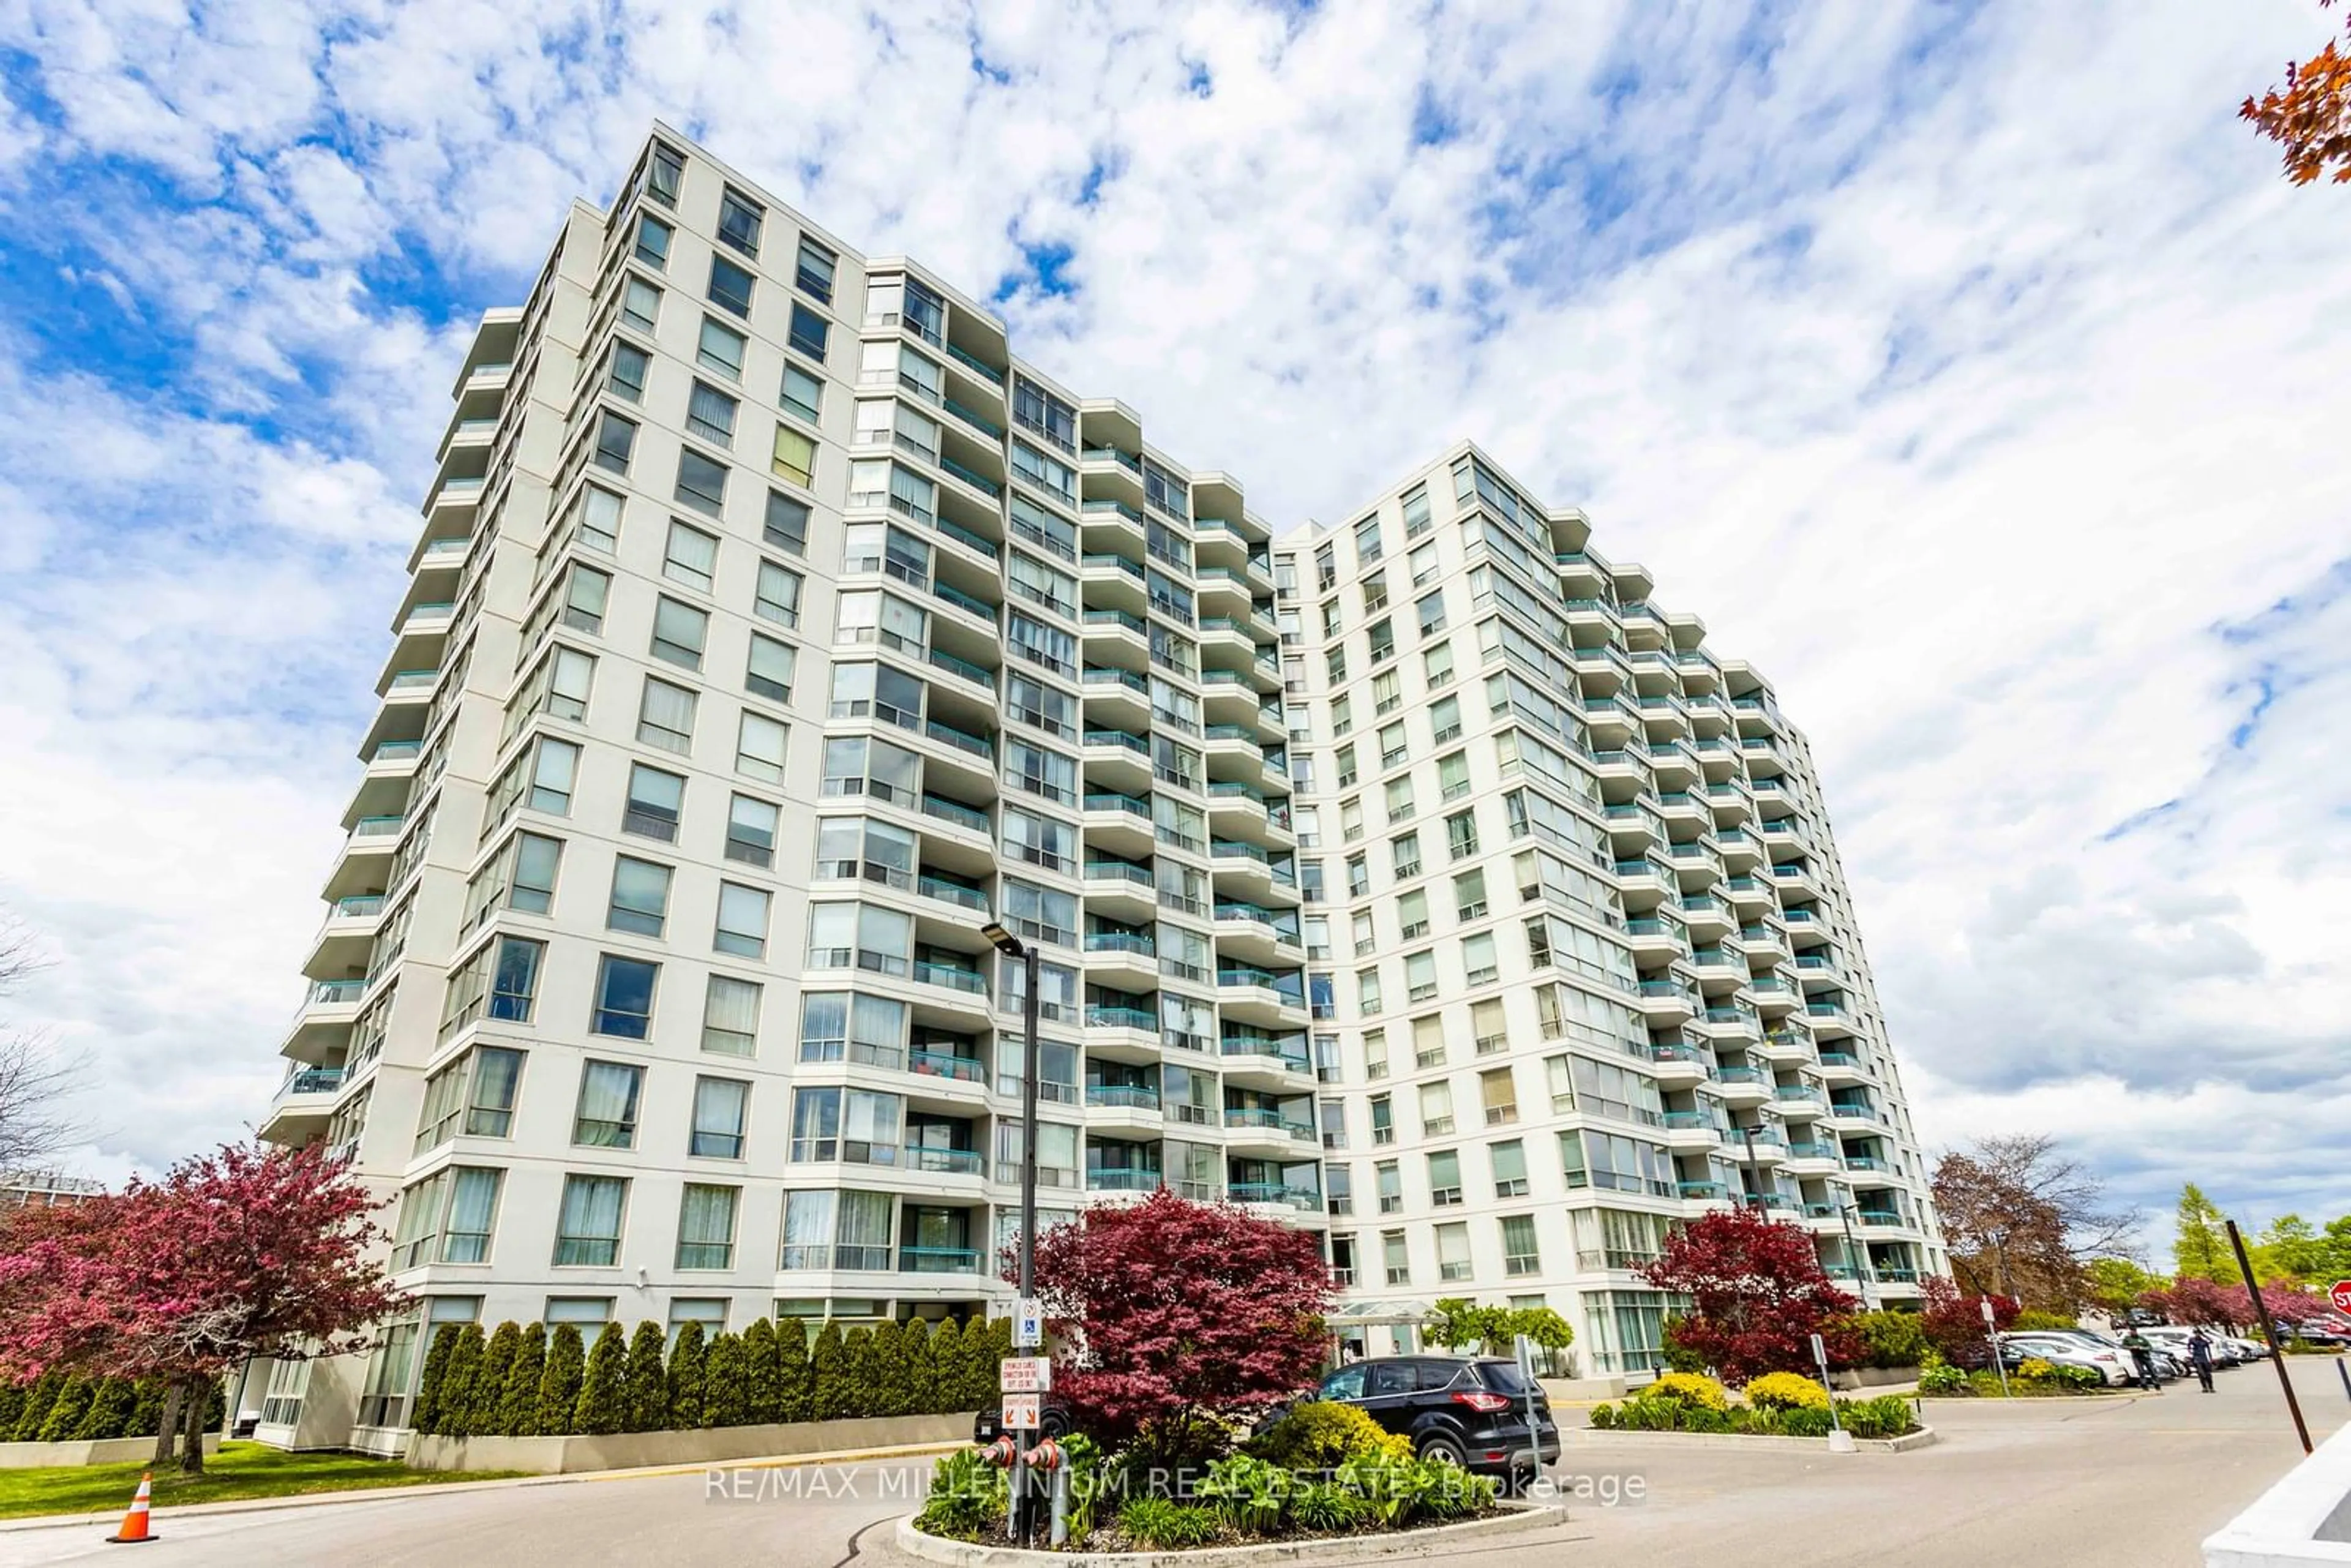 A pic from exterior of the house or condo for 4727 Sheppard Ave #1008, Toronto Ontario M1S 5B3